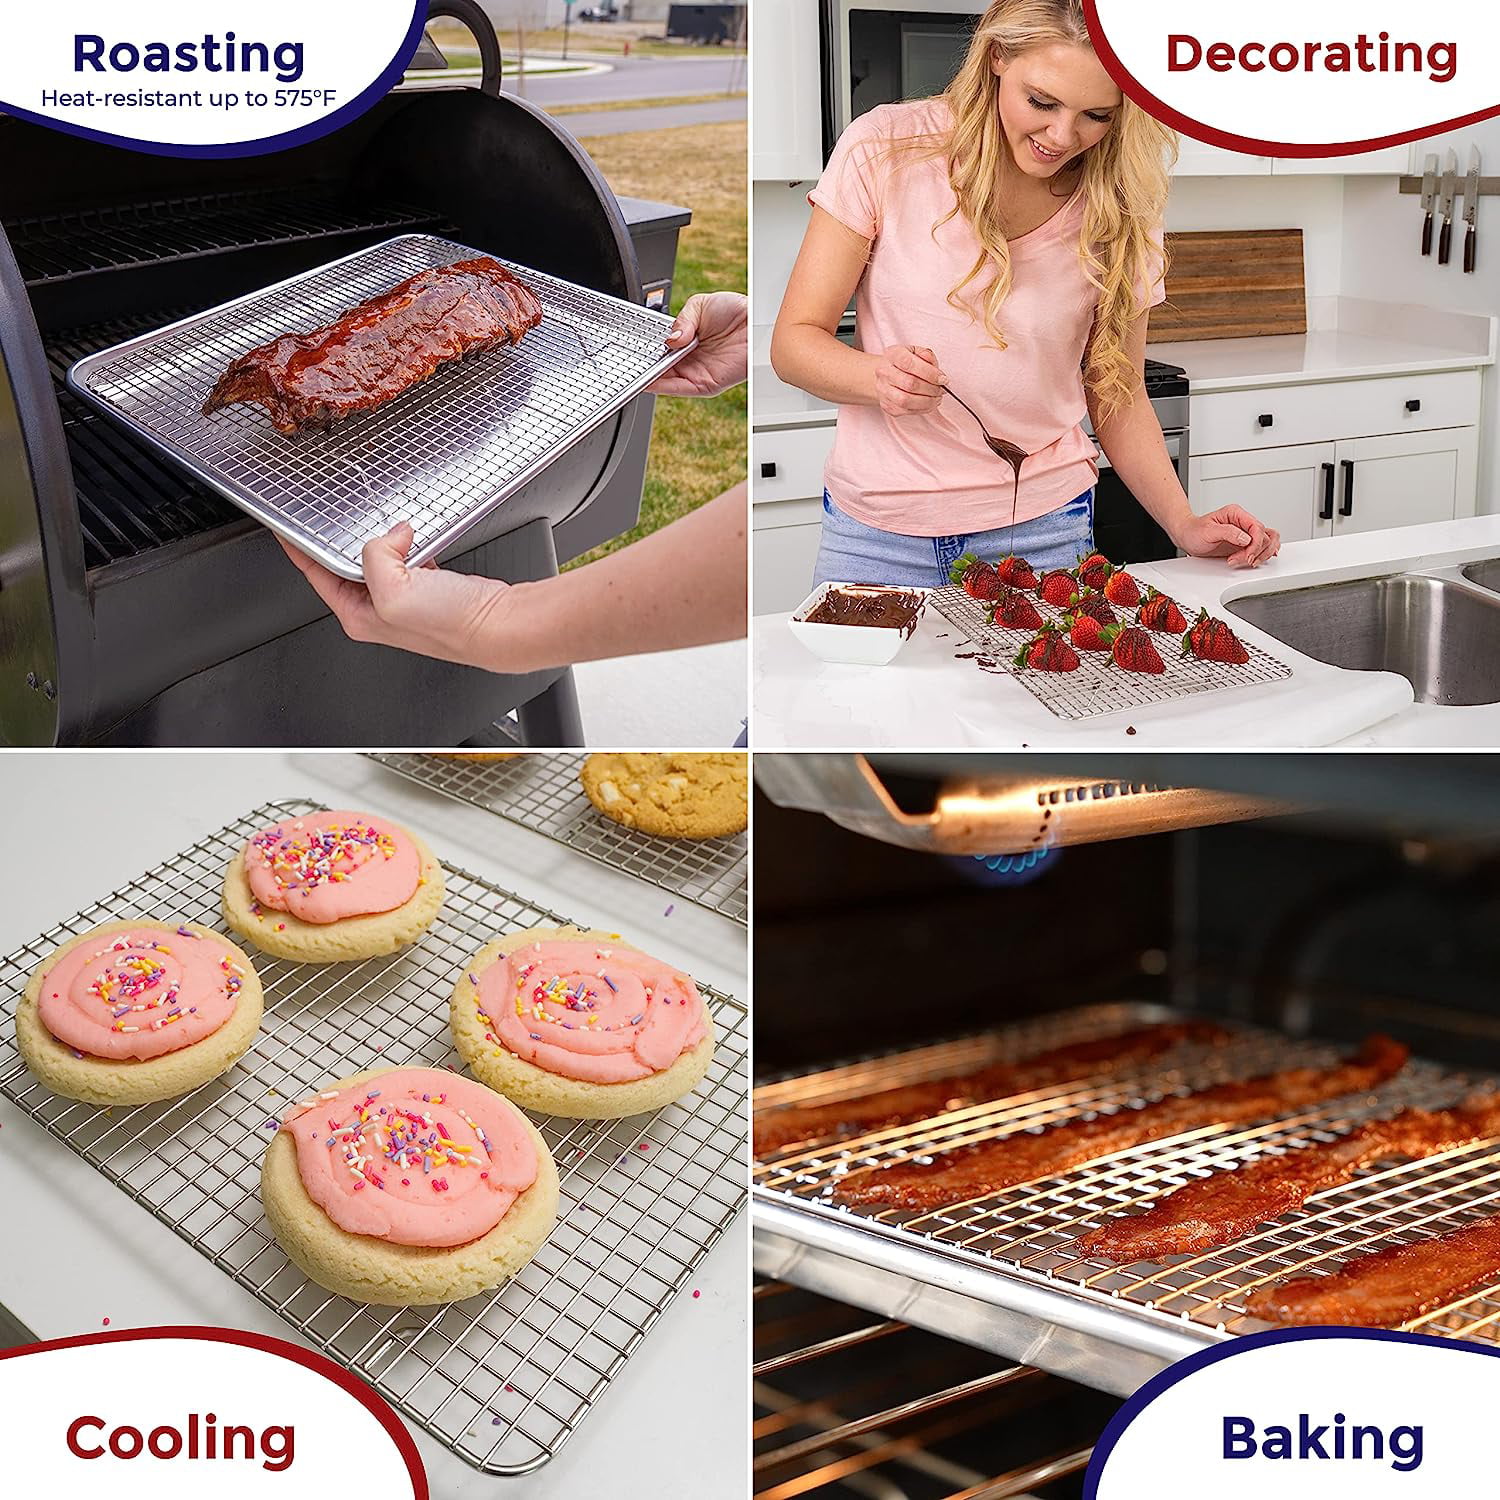 Oven-Safe Stainless Steel Wire Cooling Rack for Baking, Cake, Breads - Oven  Cooking, Roasting, Grilling - Heavy Duty Commercial Quality Fits Jelly Roll  Pan 